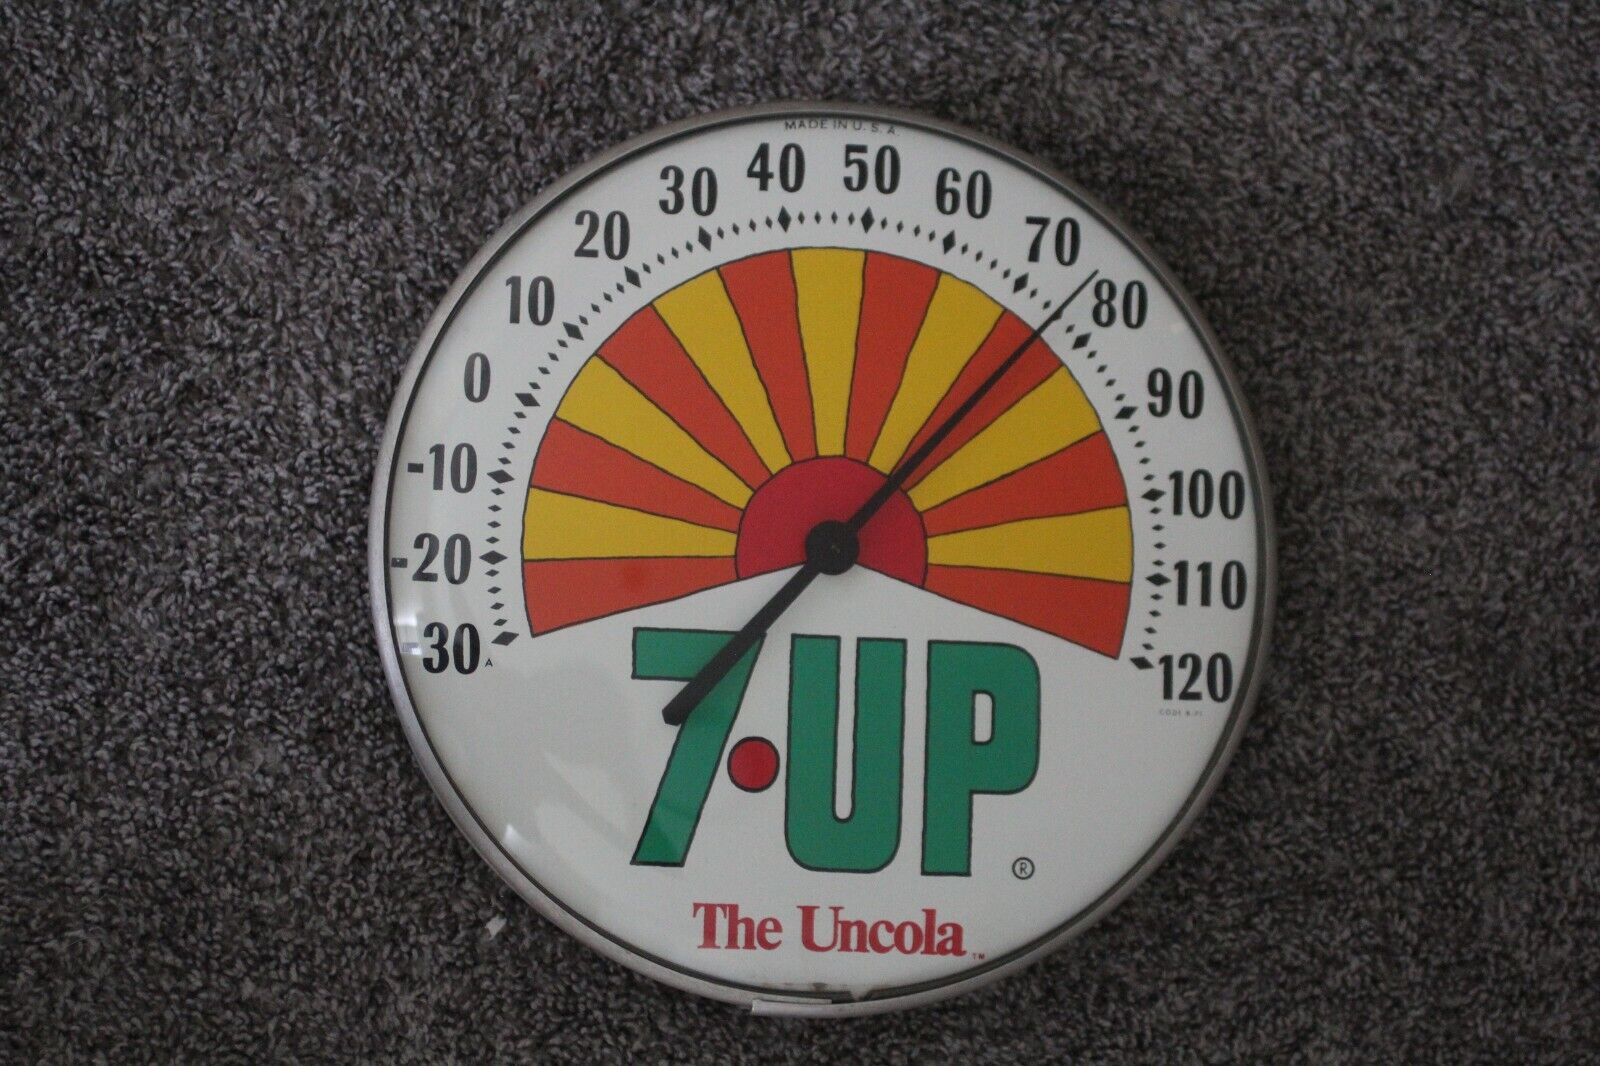 7up The UnCola Soda Advertising Glass Dome Thermometer Sign 